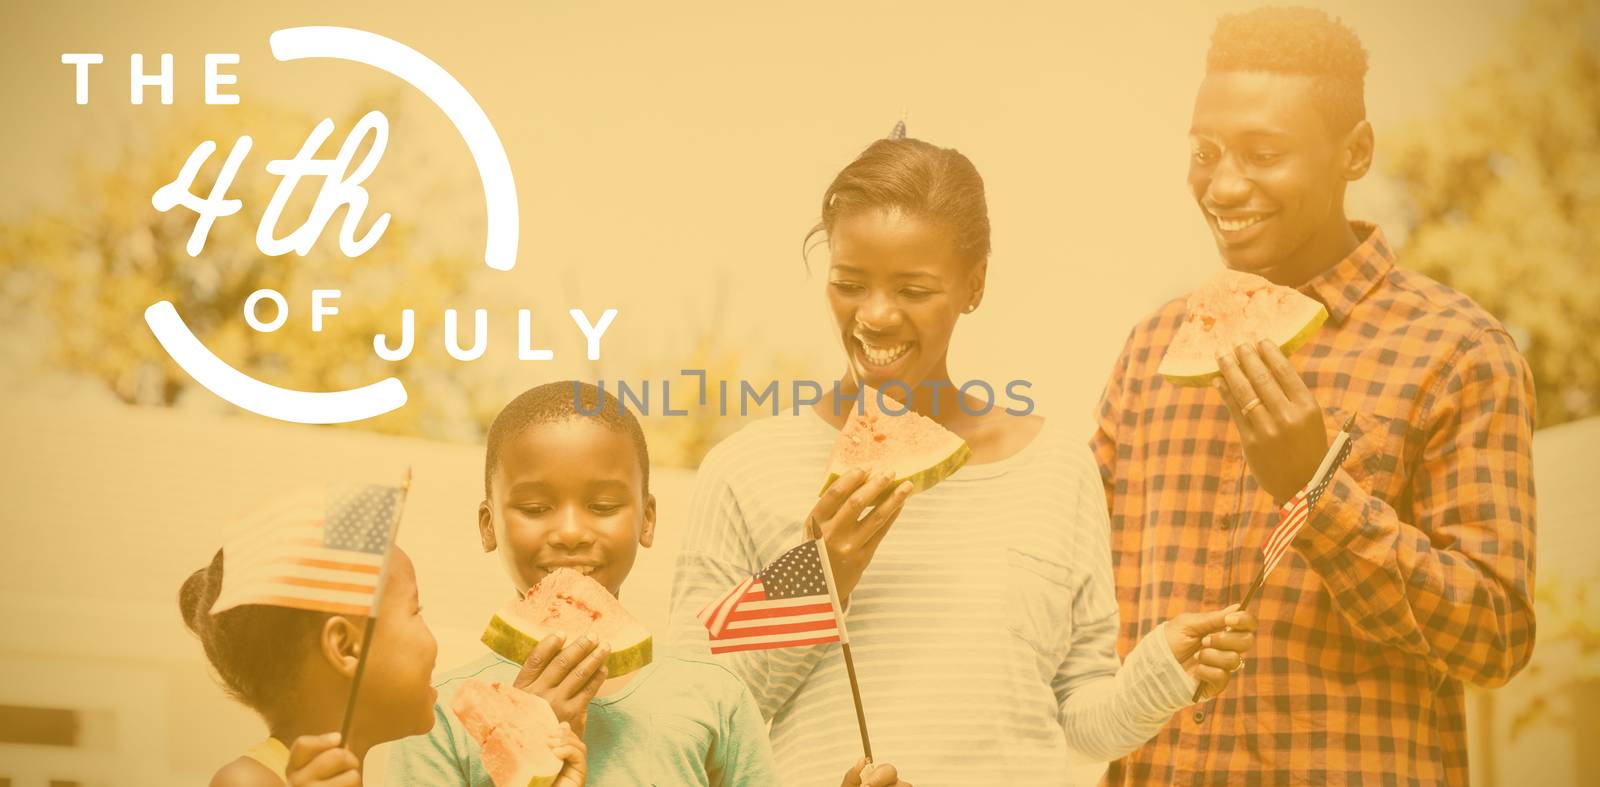 Colorful happy 4th of july text against white background against happy family eating watermelon while holding usa flag 